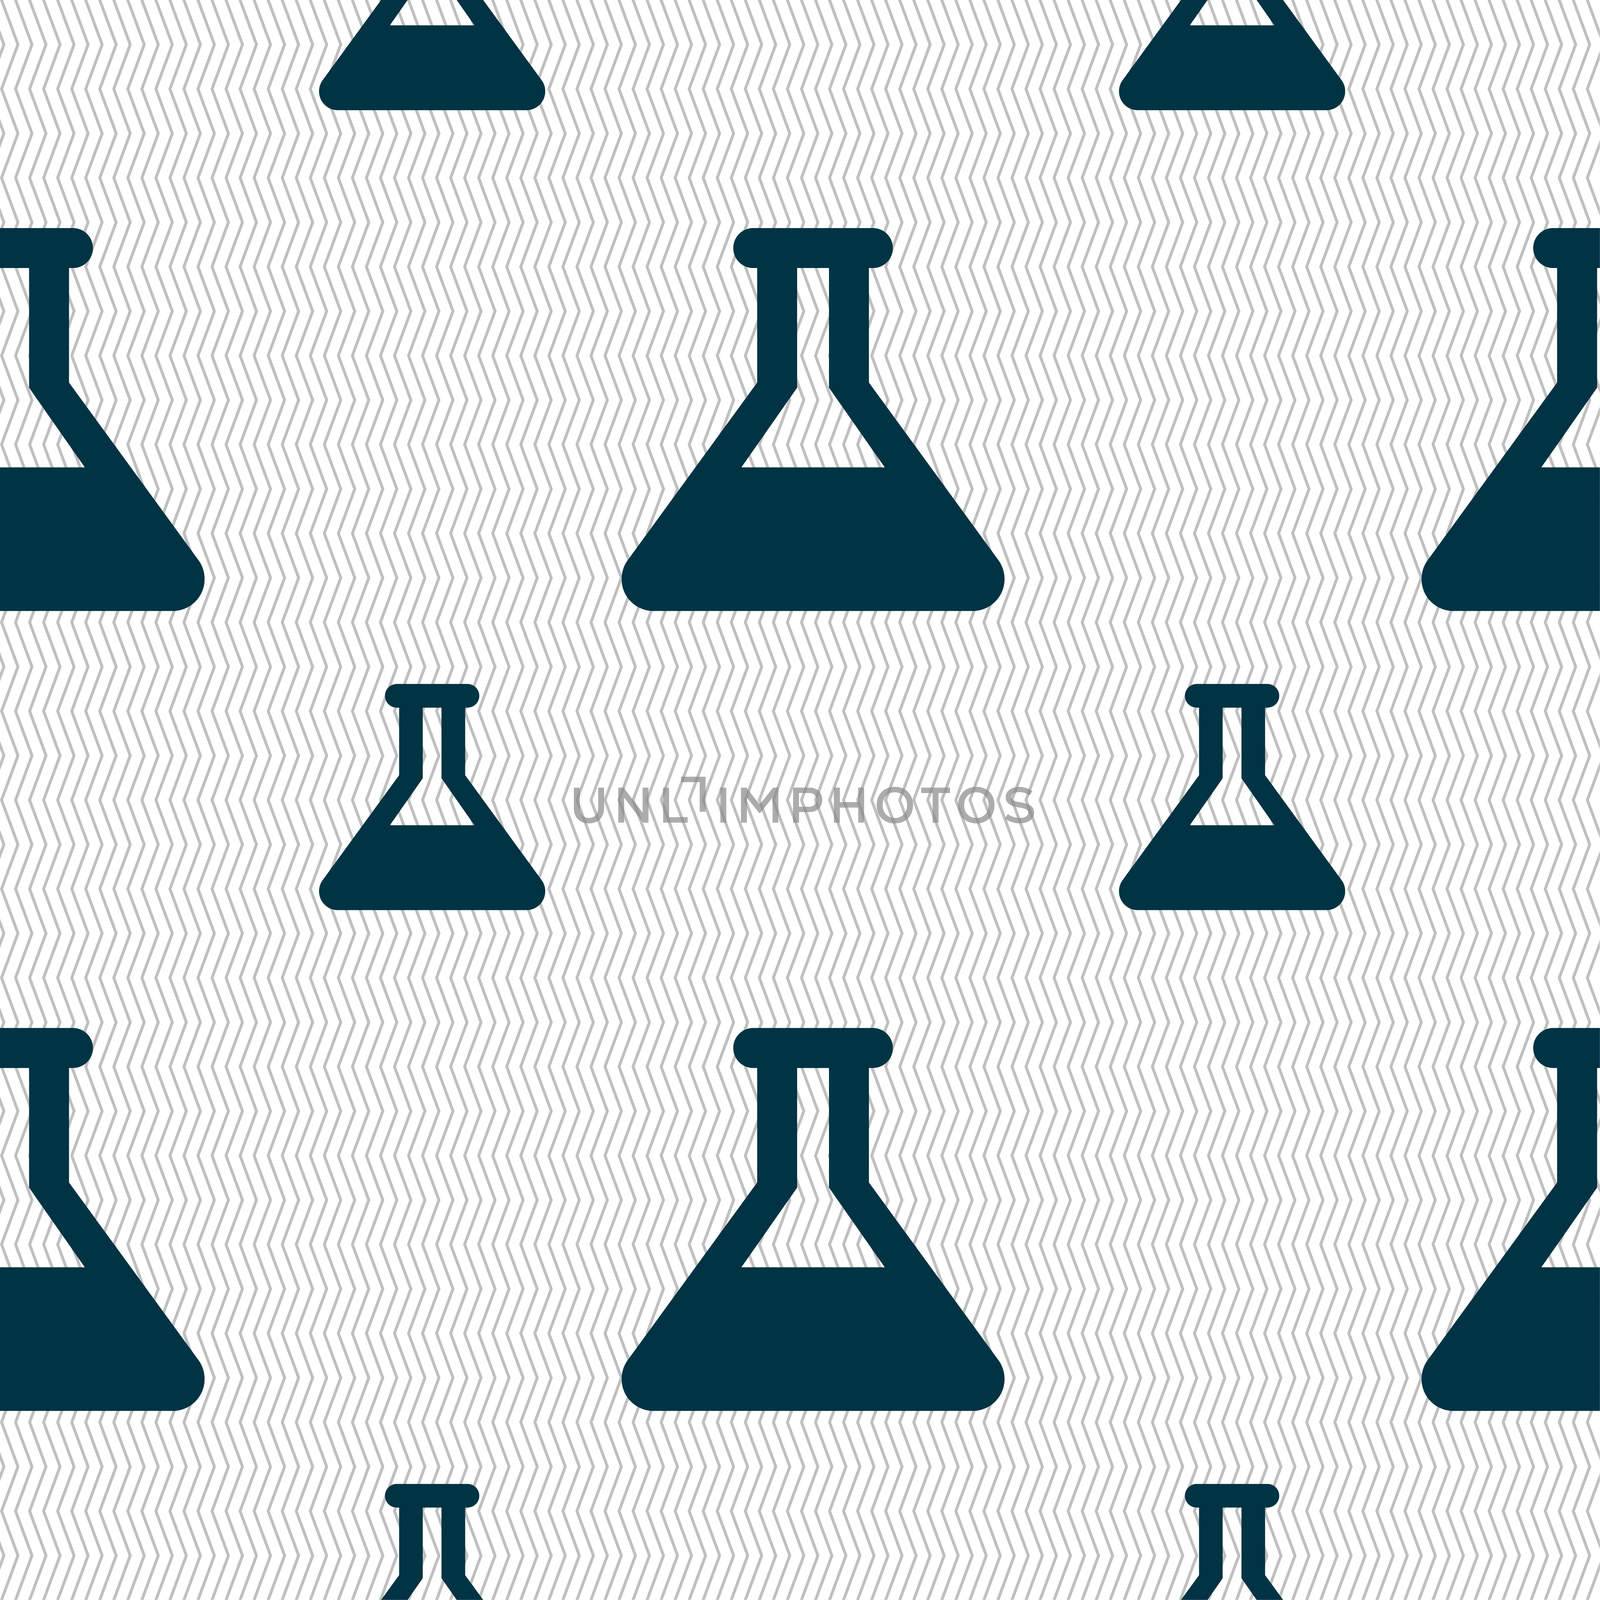 Conical Flask icon sign. Seamless pattern with geometric texture. illustration